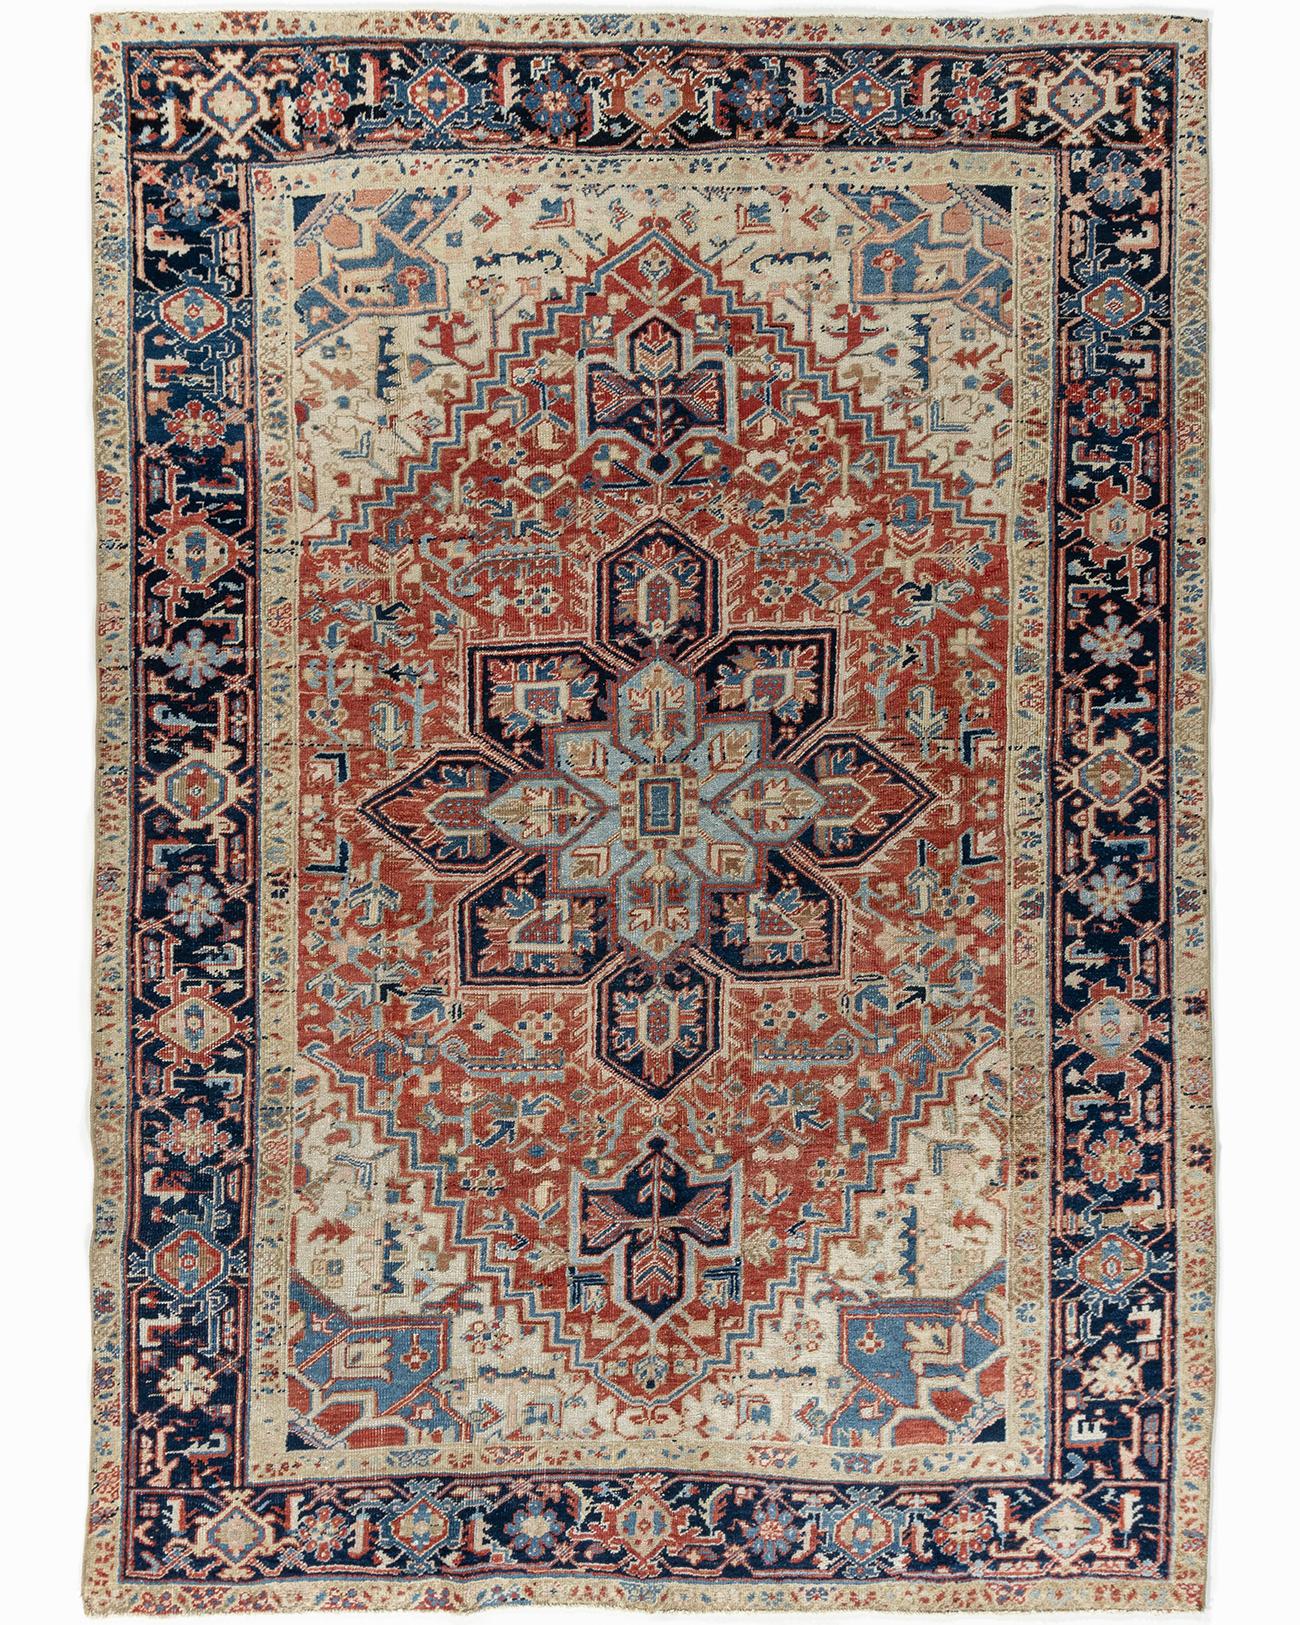 Vintage Persian Heriz rug 6'5 x 9'. As perpetually fashionable as they are collectible, traditional Heriz luxury handmade rugs are skillfully woven in vibrant colors and emphatic geometric designs. The Heriz district of NW Persia has been weaving